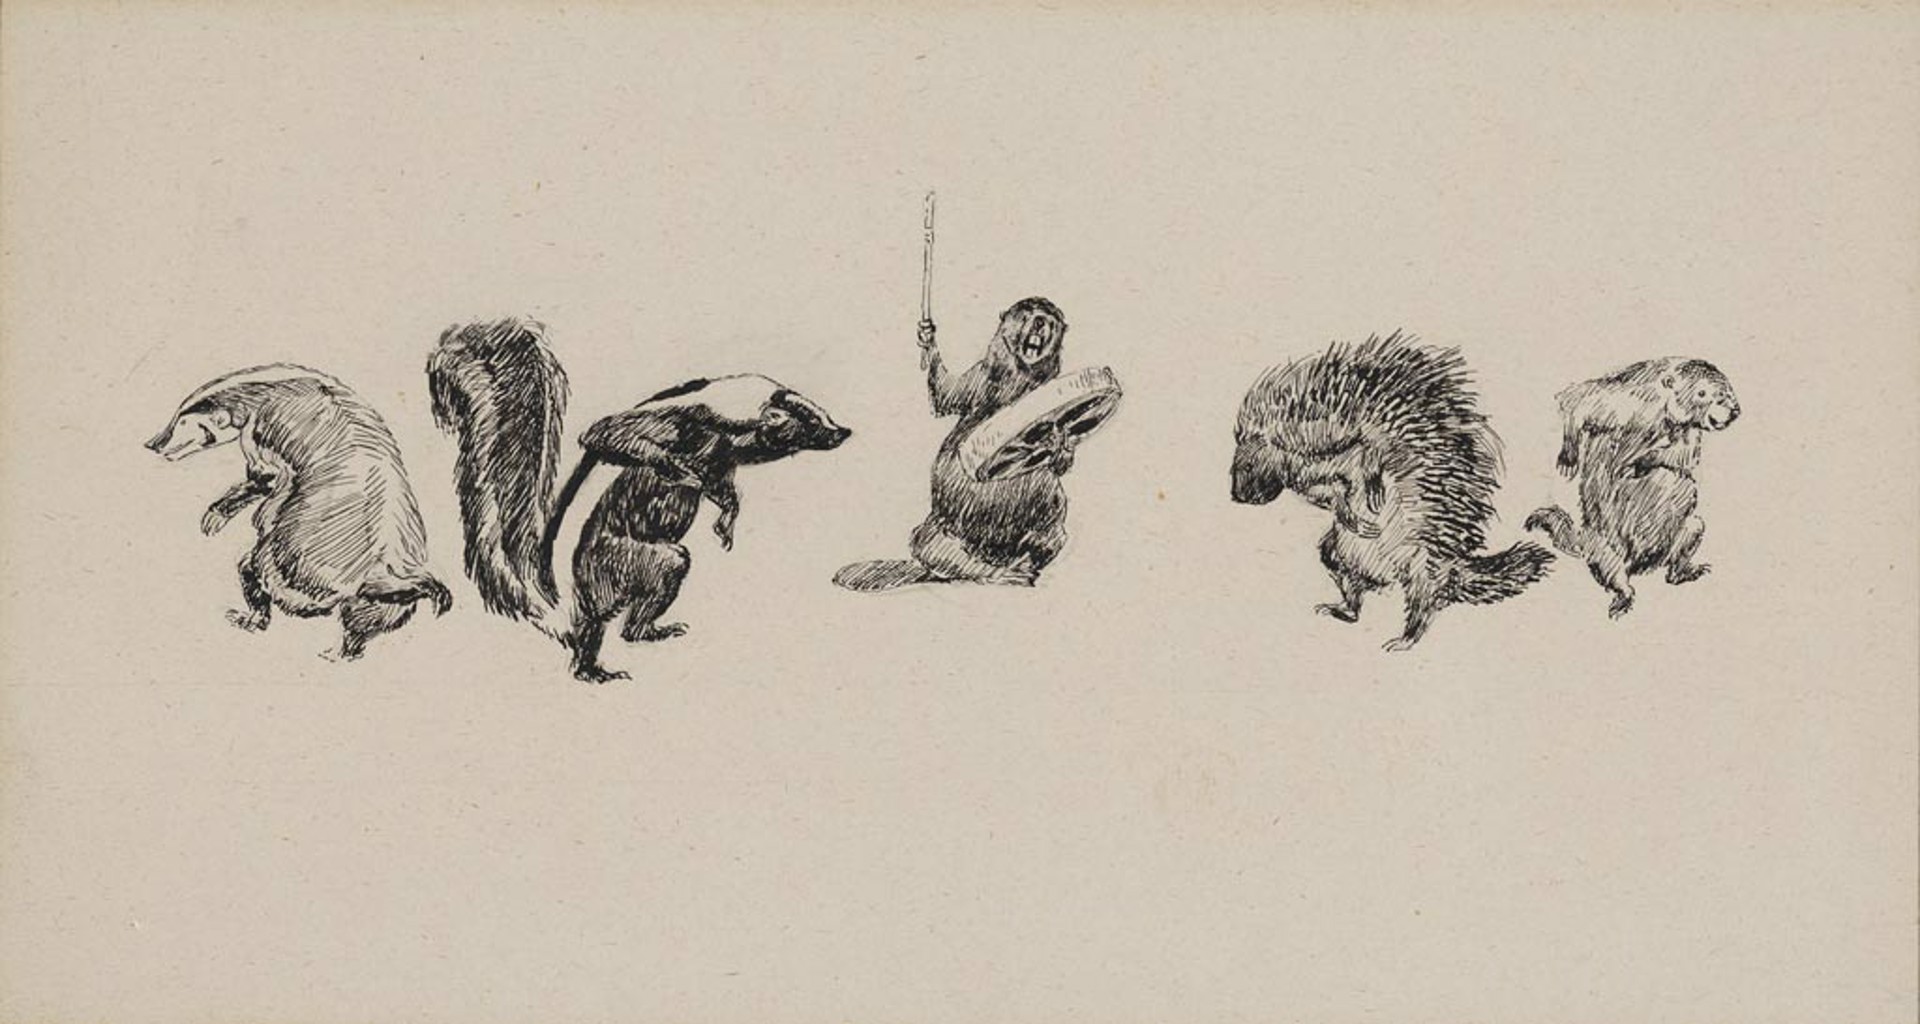 Napi And His Friends by Charles M. Russell